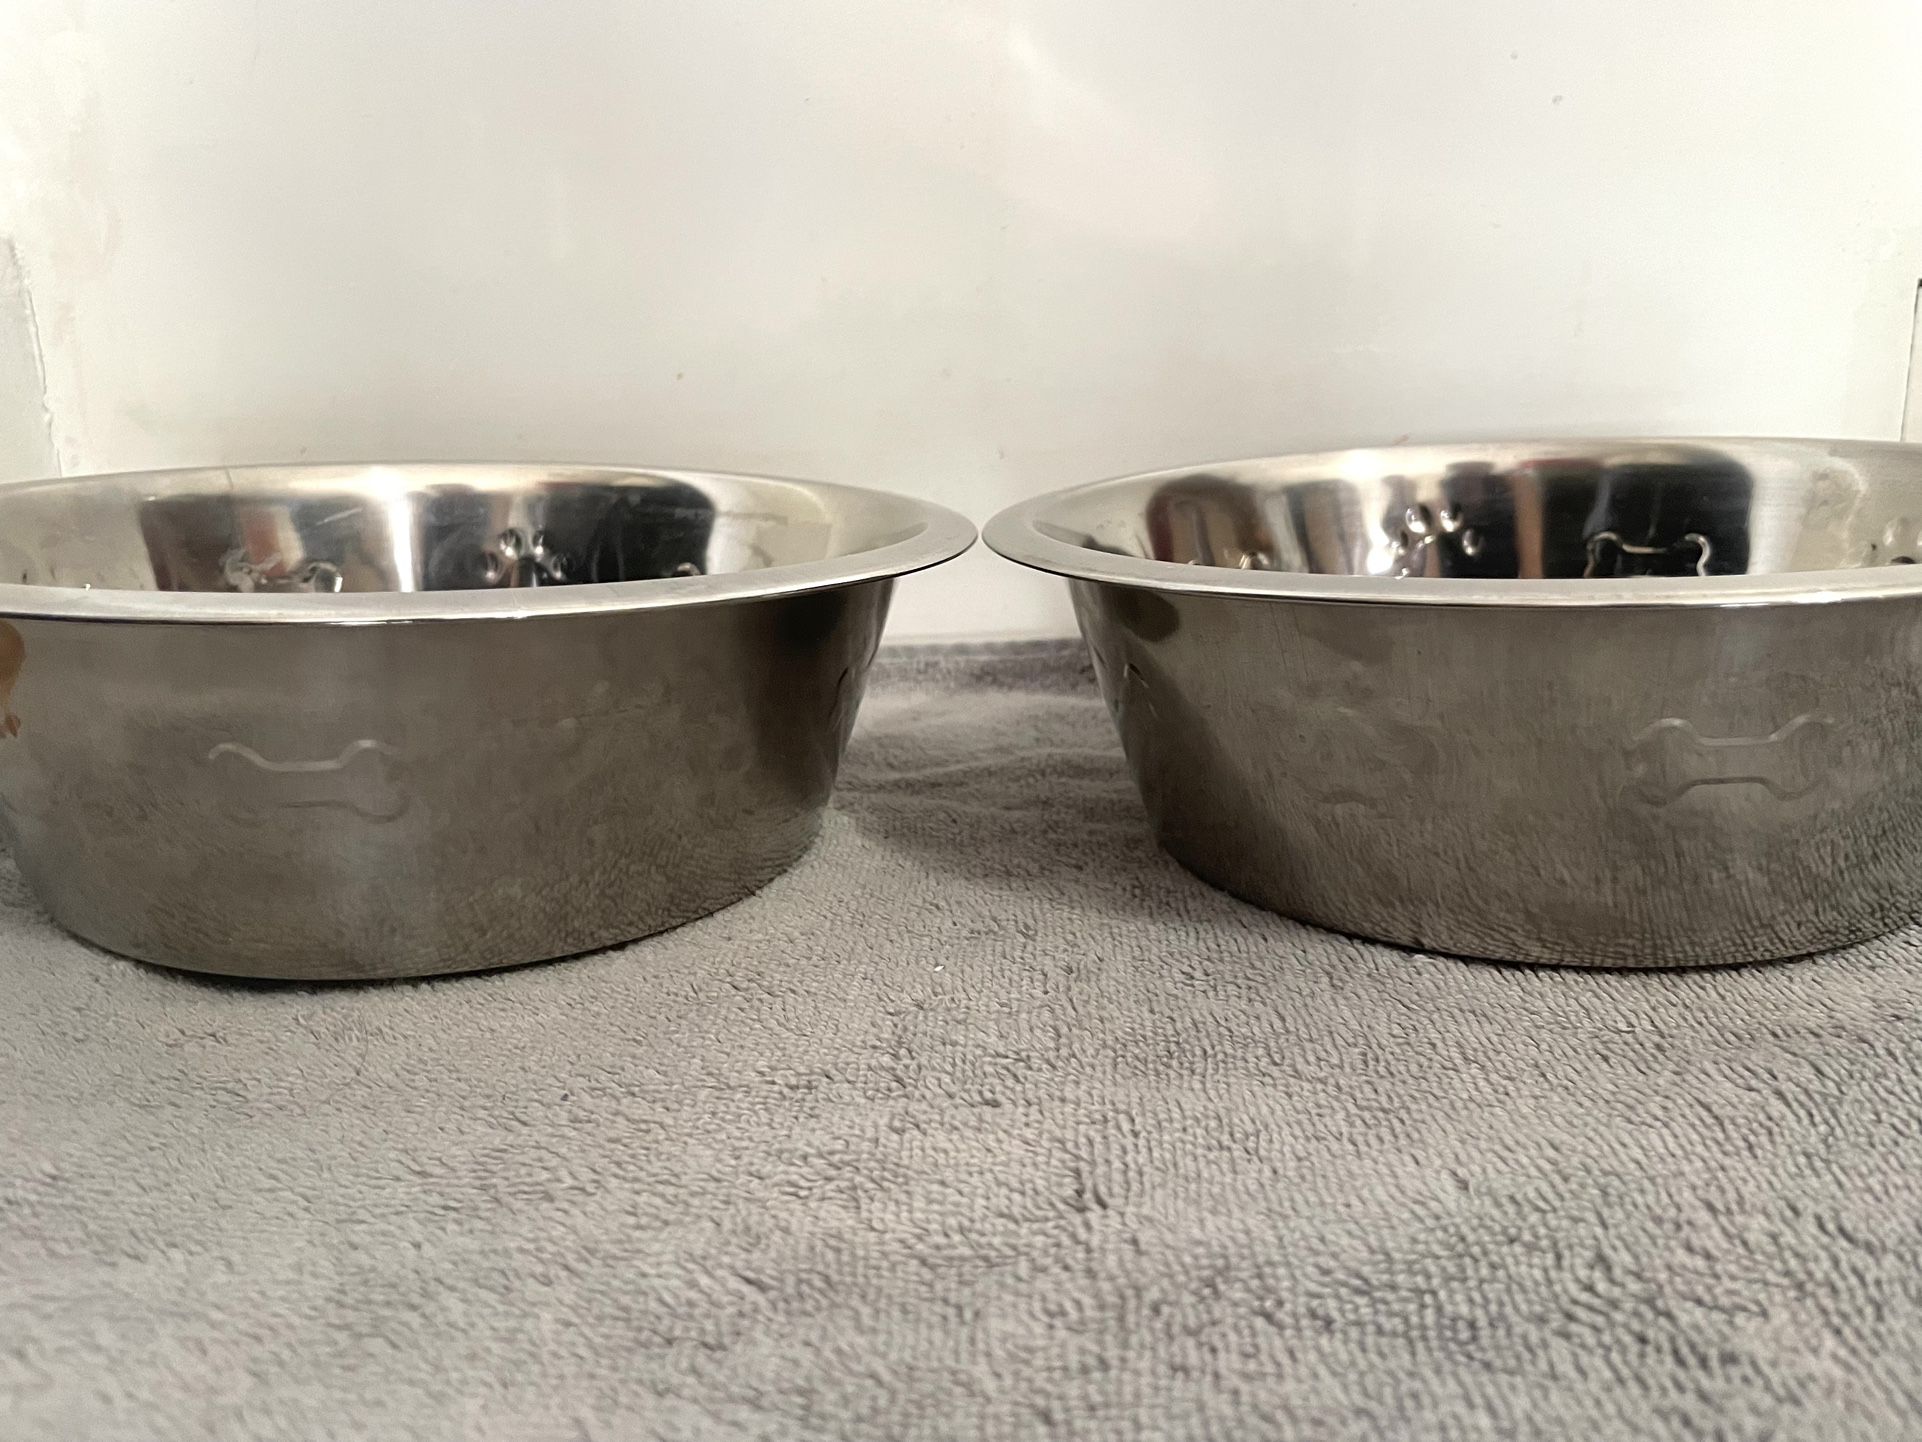 2 Stainless Steel Pet Plates